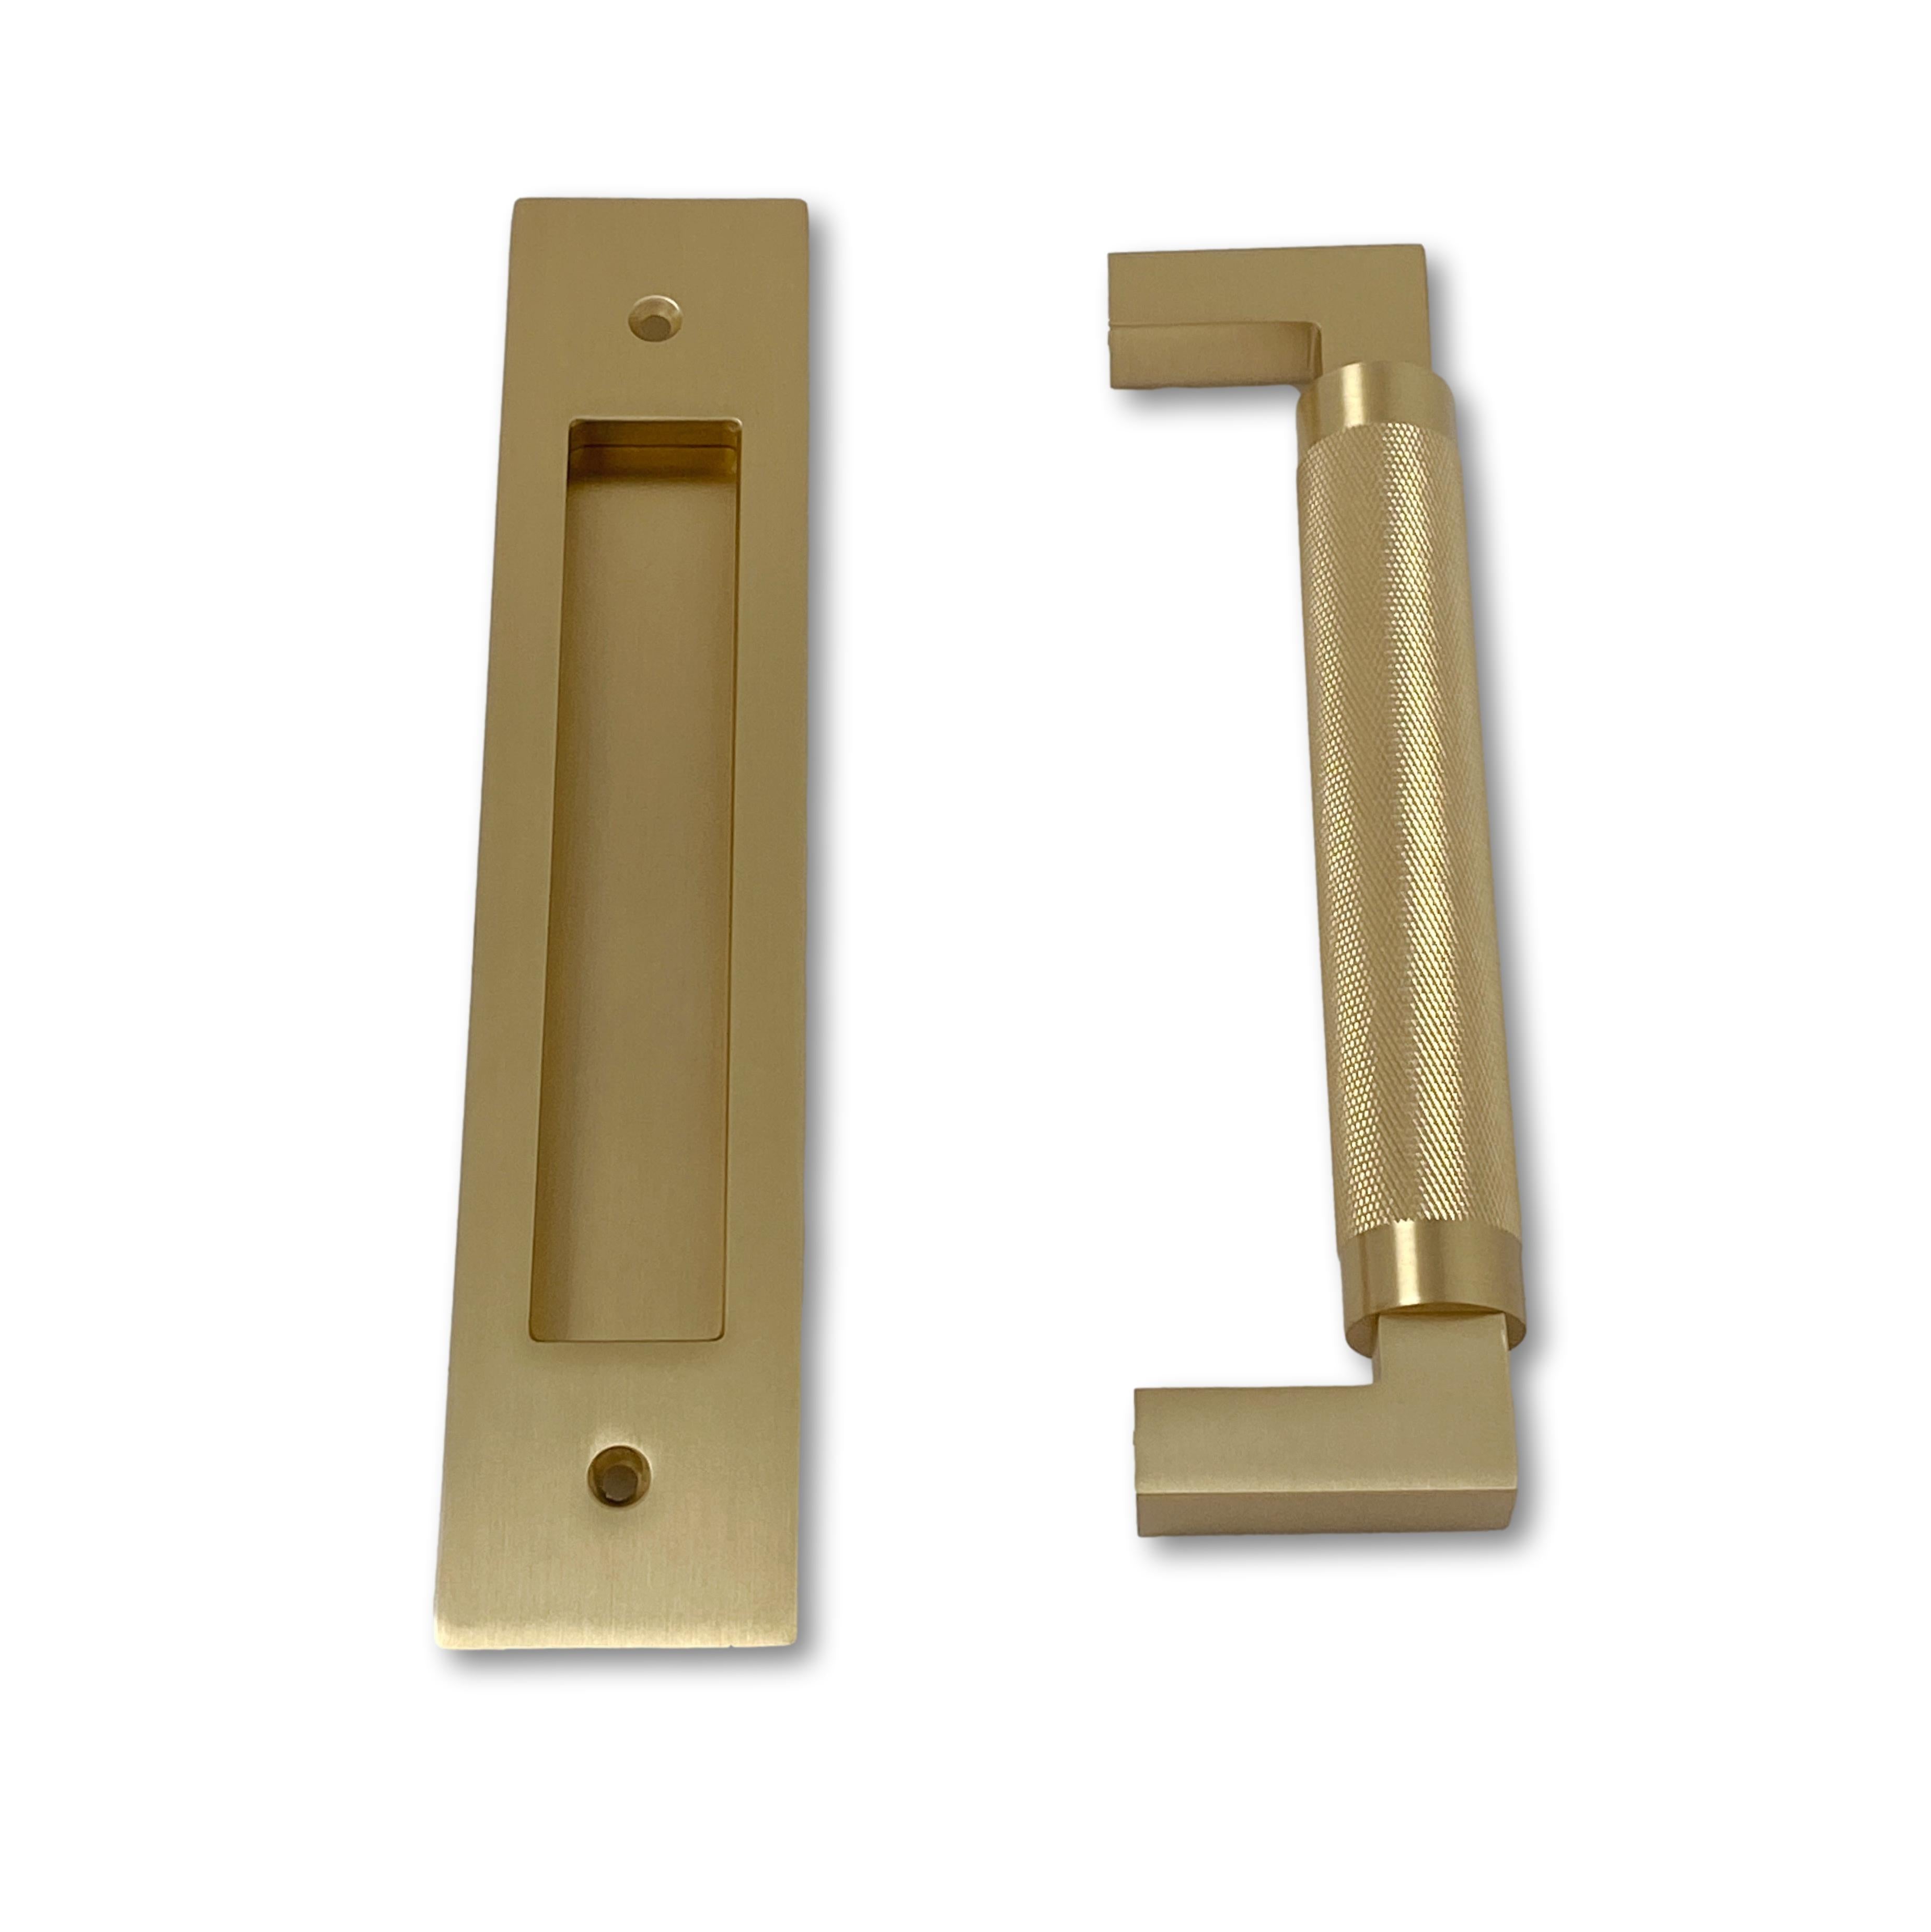 Door Flush Pull and Knurled Handle "Helix" Hardware for Interior Sliding and Barn Doors - Industry Hardware